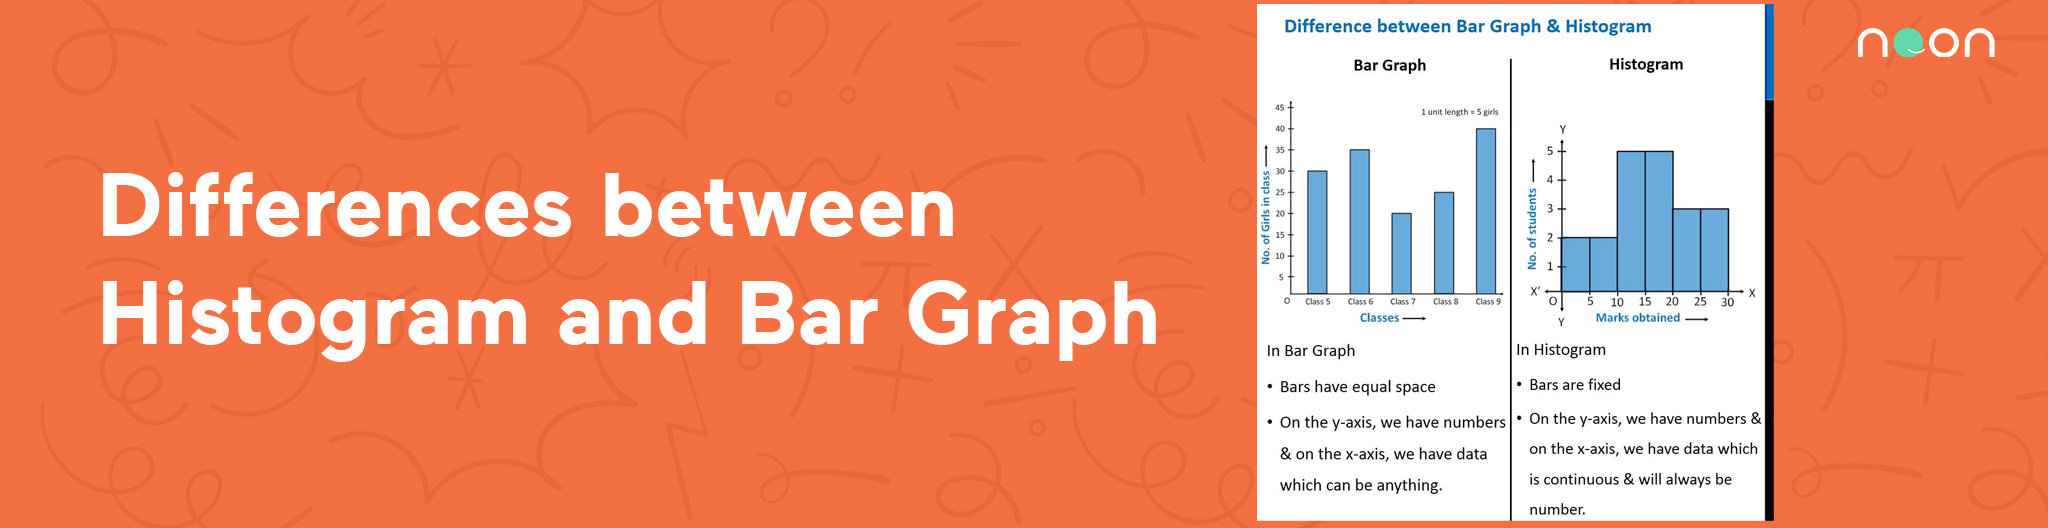 differences between histogram and bar graph